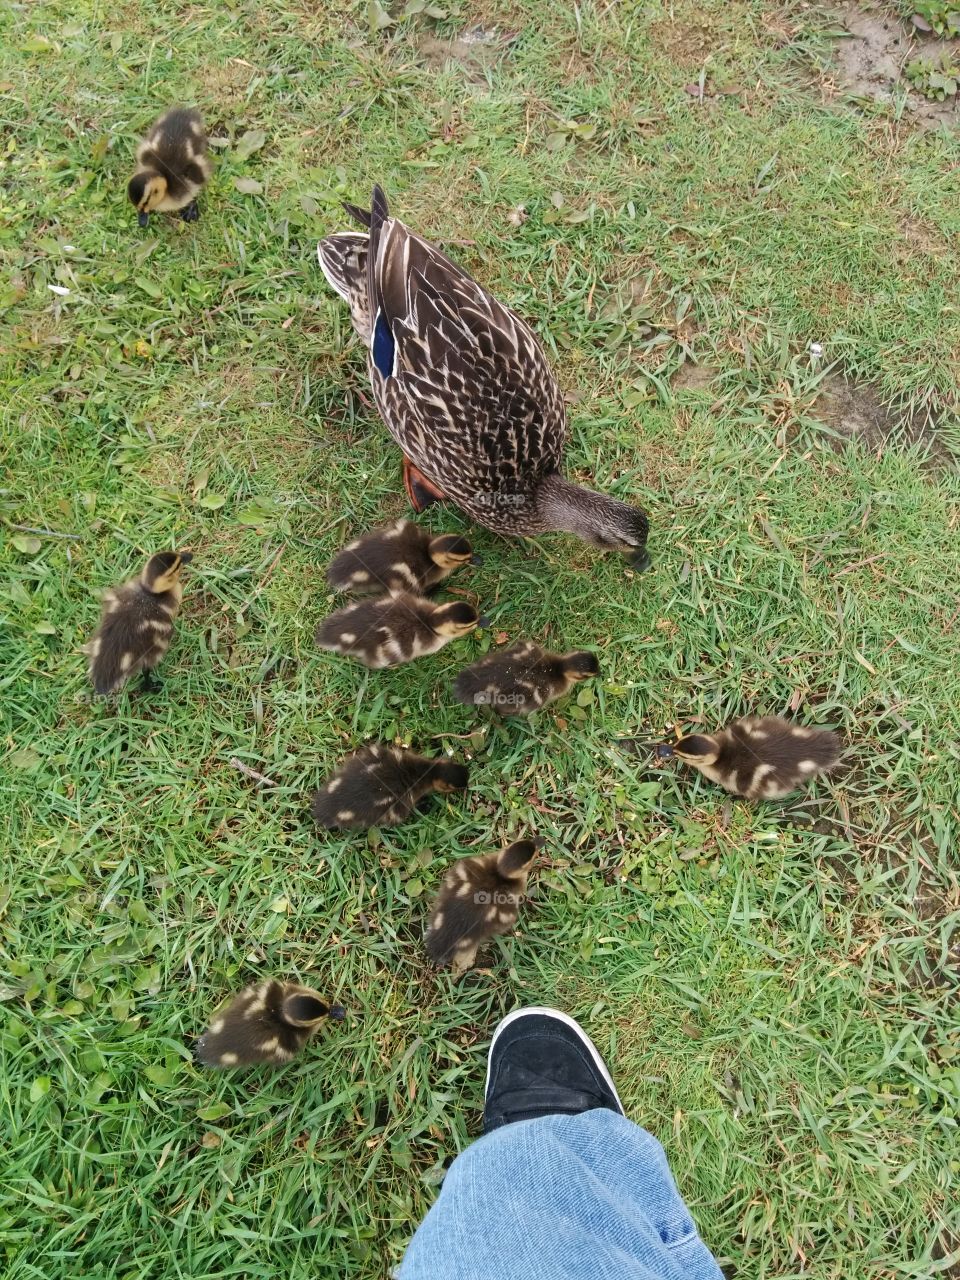 Ducklings top view. ducklings so close to my shoe